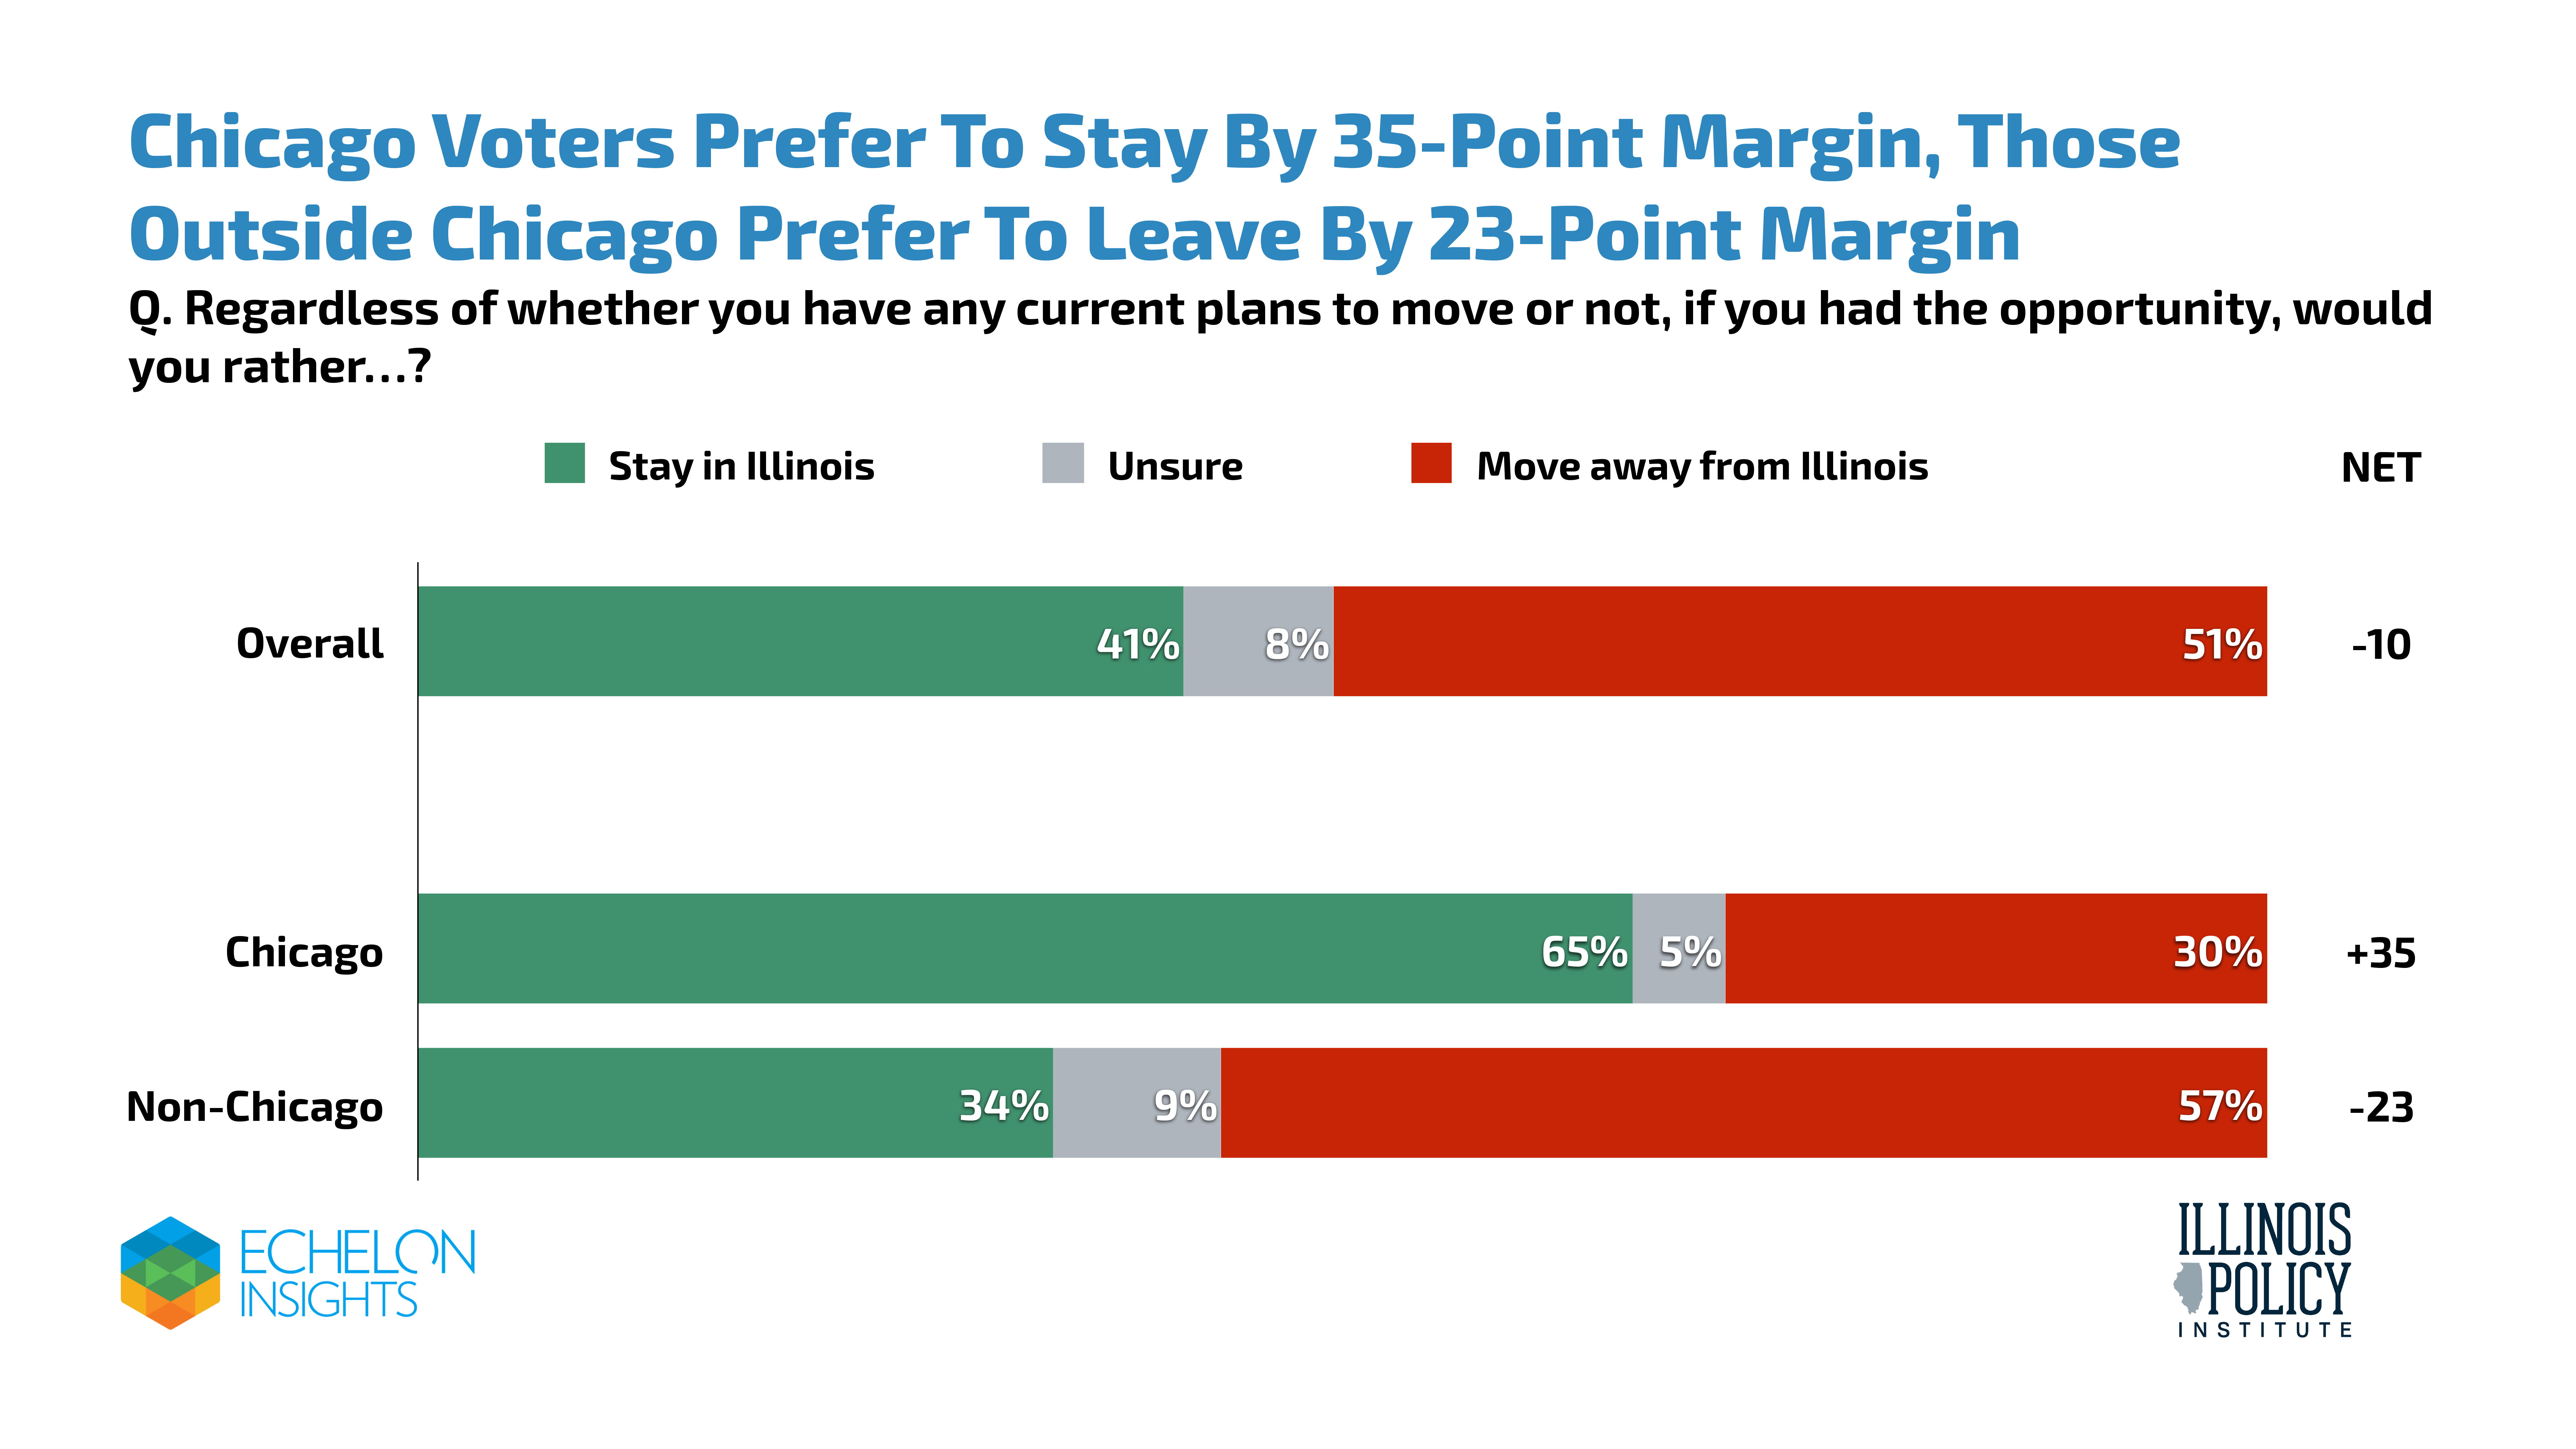 Chicago voters prefer to stay